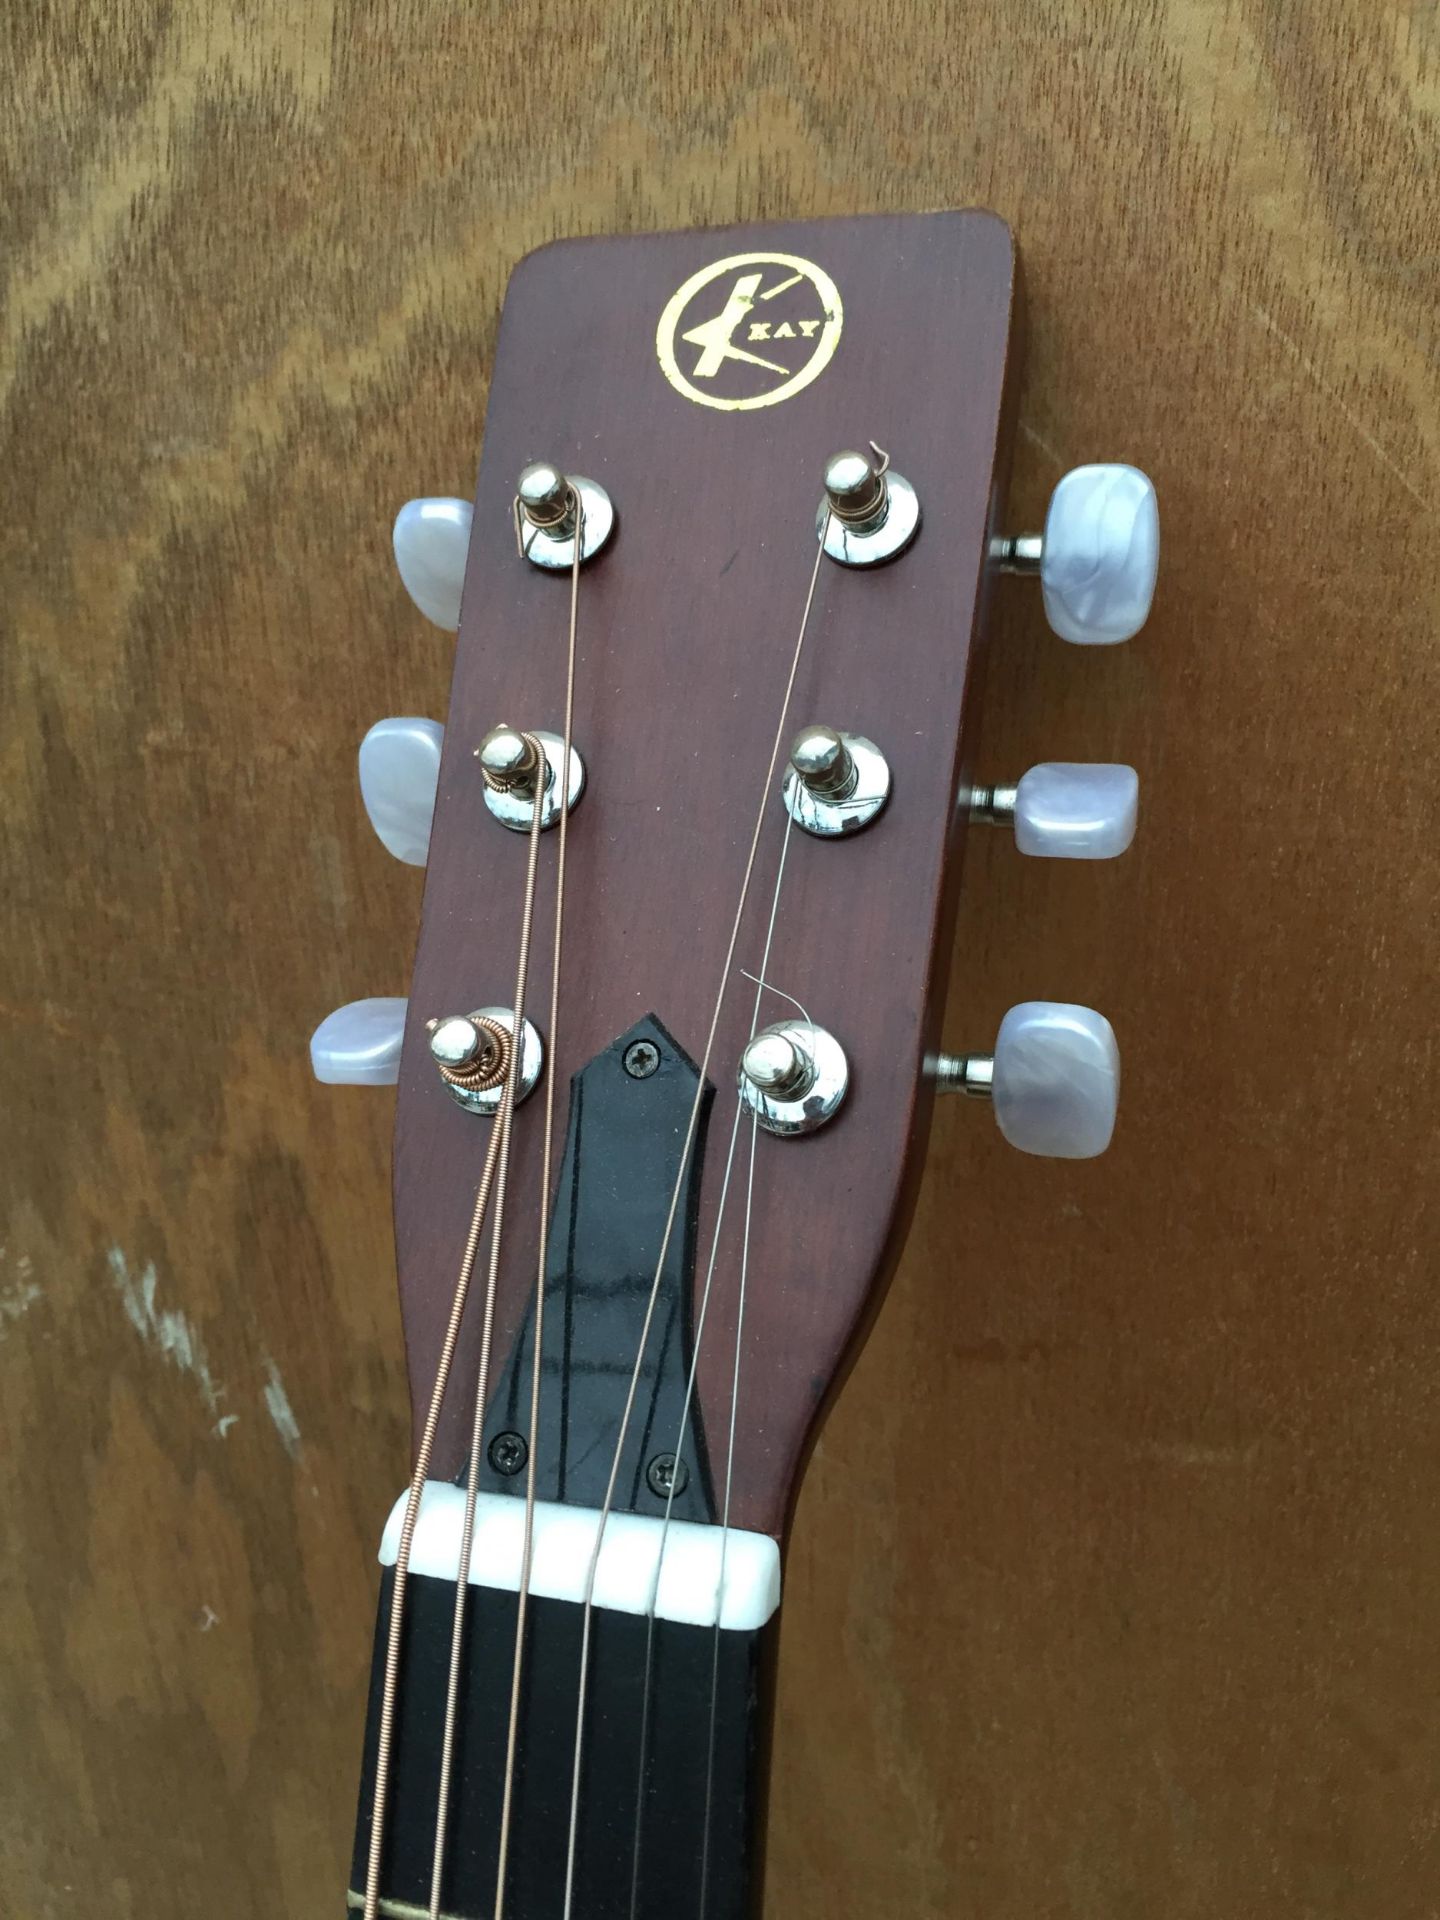 A KAY ACOUSTIC GUITAR - Image 4 of 6